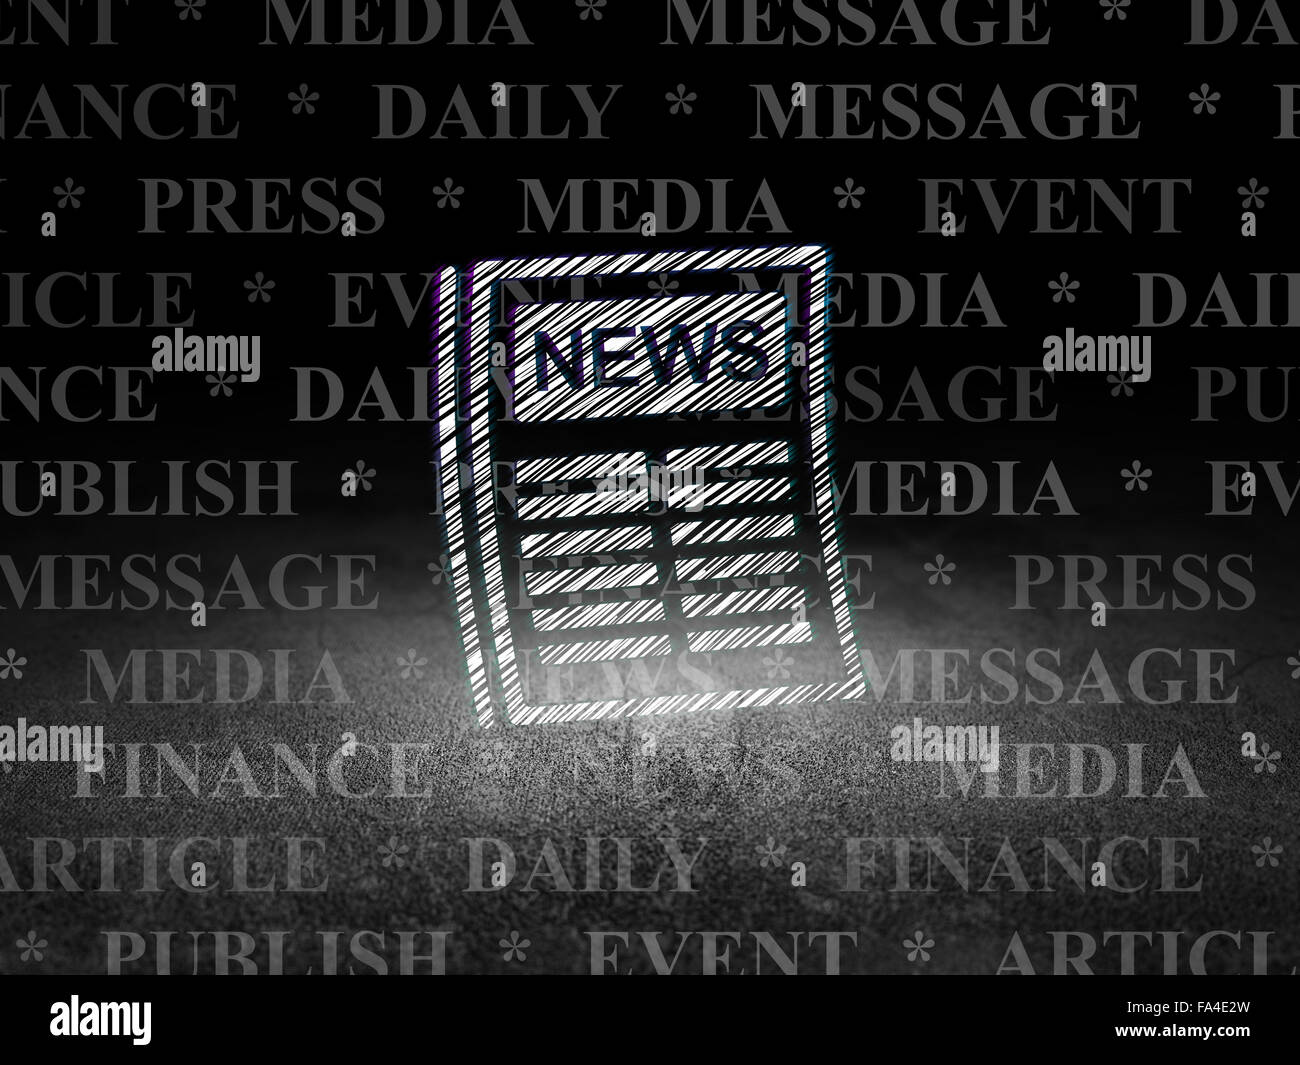 Newspaper Paper Grunge Aged Newsprint Seamless Pattern Vintage Old  Newspapers Stock Photo by ©OlgaZe 544872486